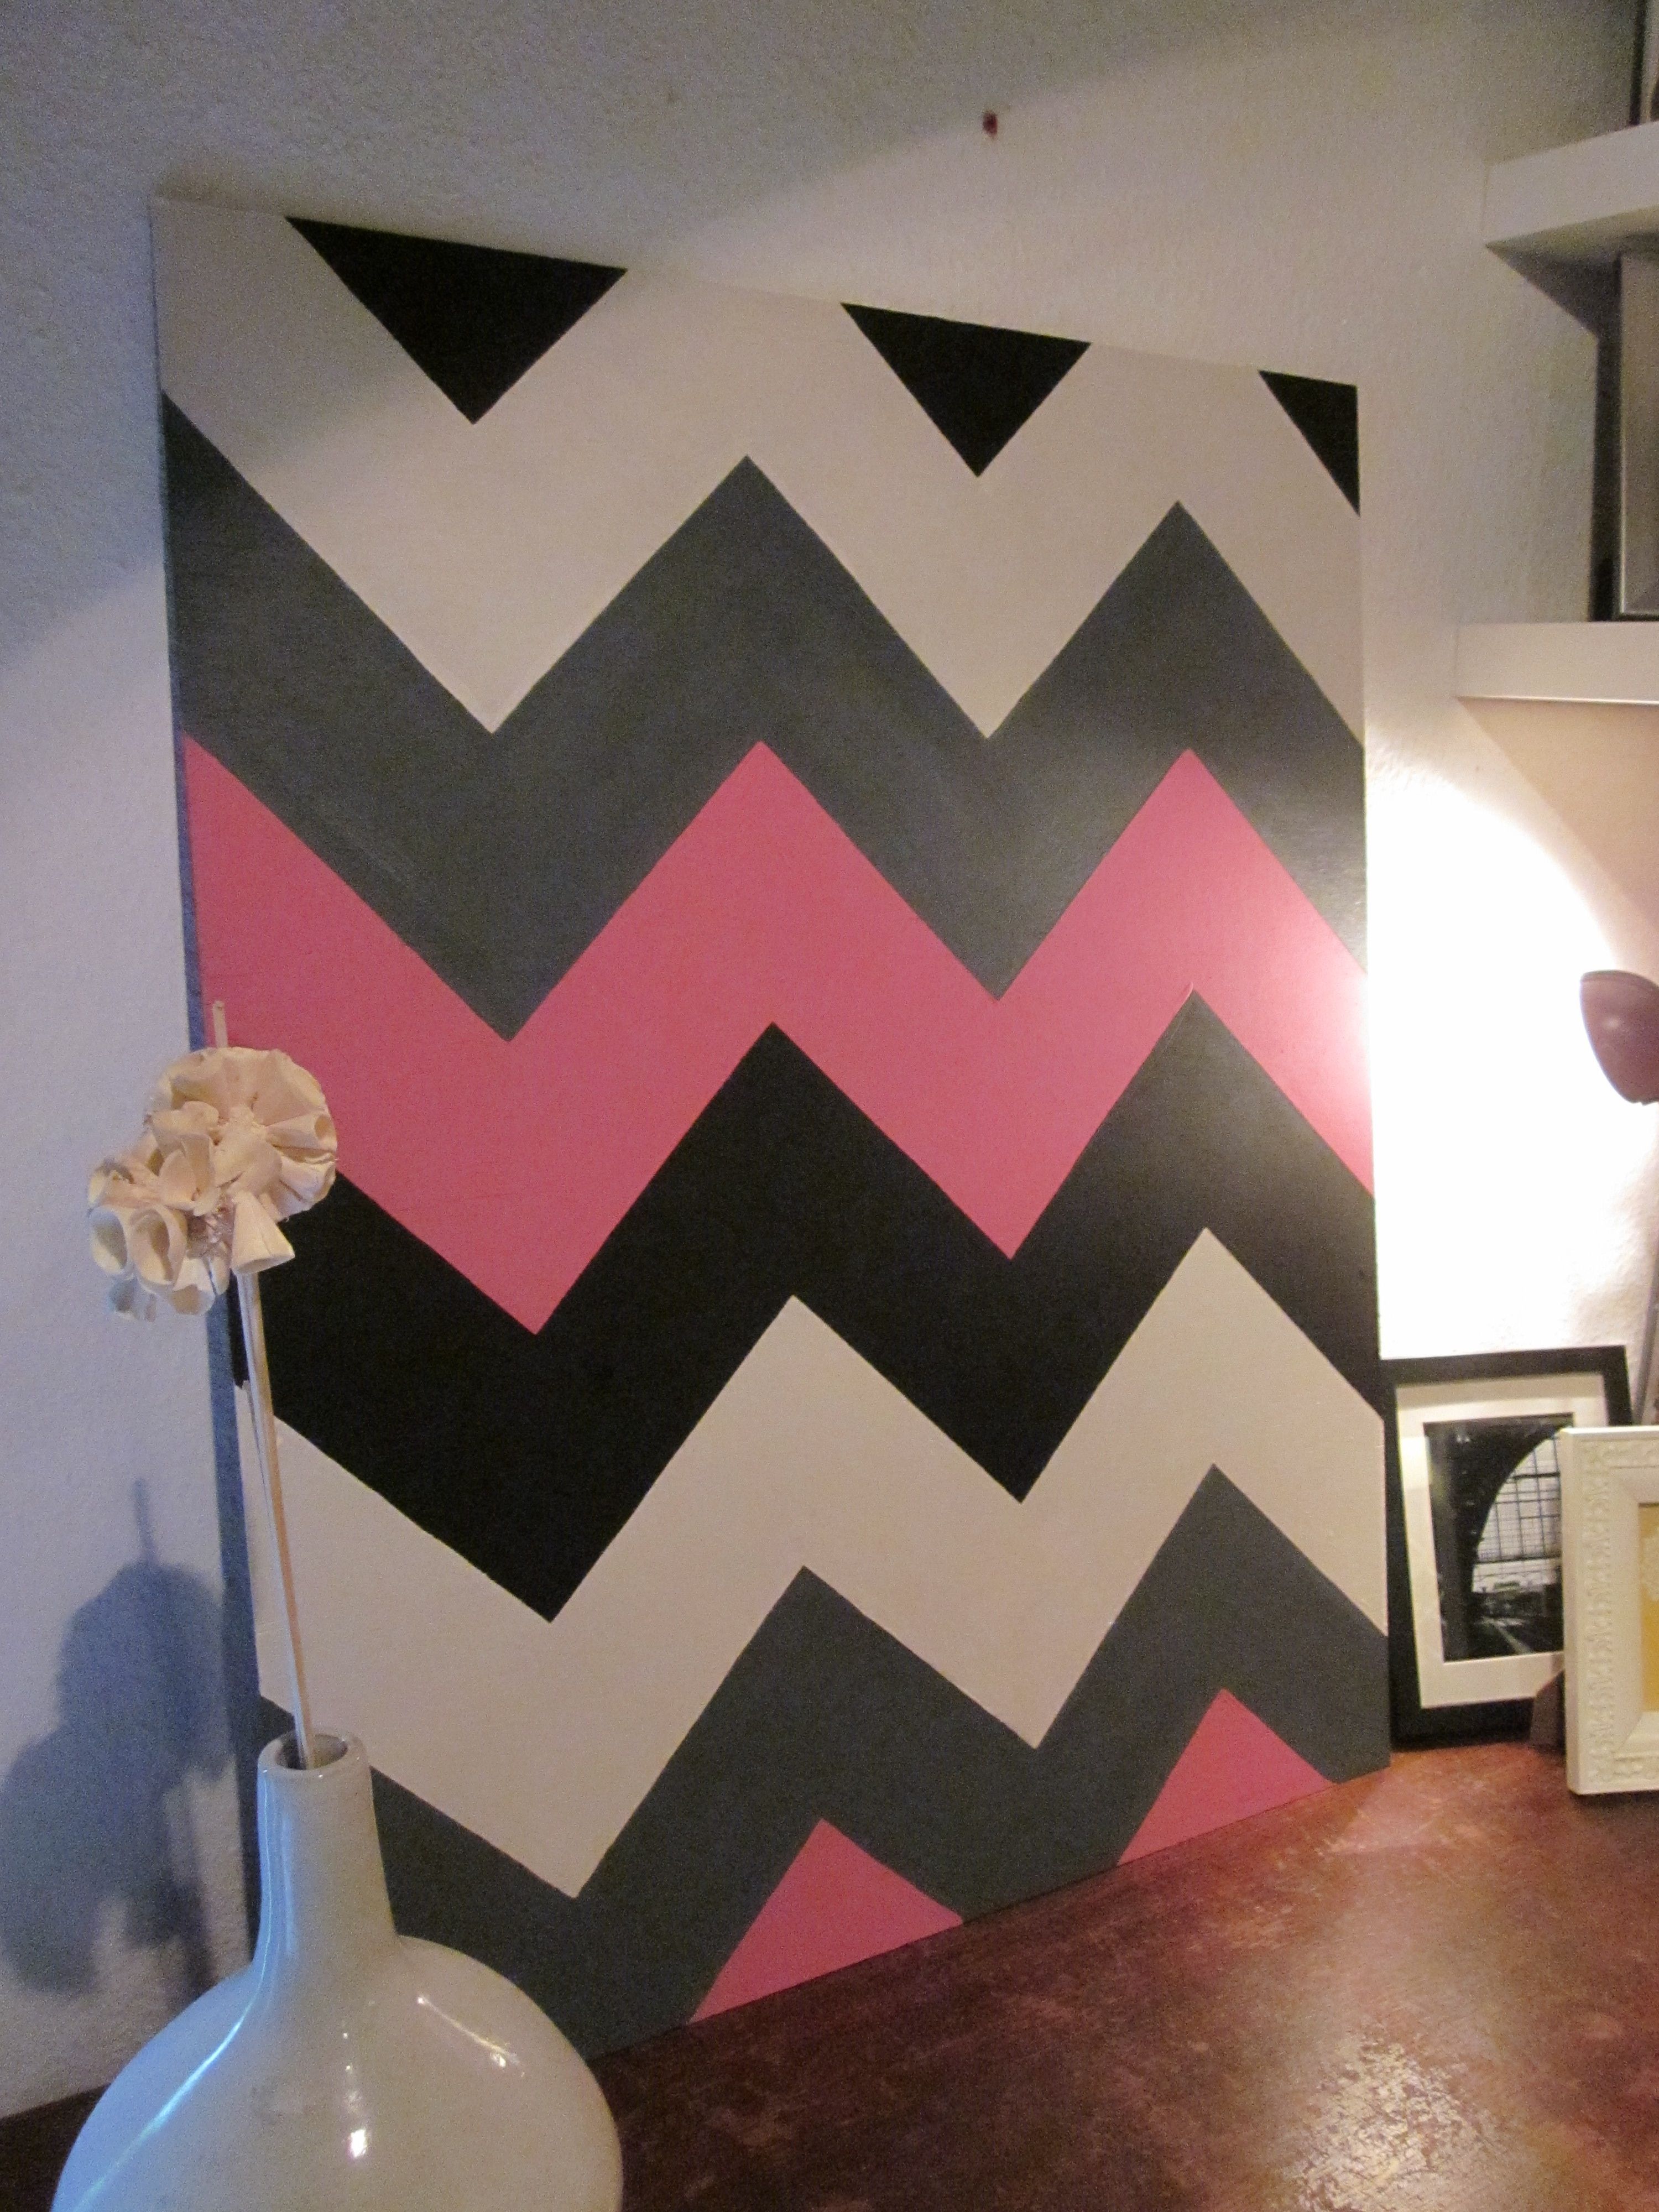 Four Colored Chevron Wall Art | Decorating Ideas | Pinterest | Walls With Newest Chevron Wall Art (View 2 of 20)